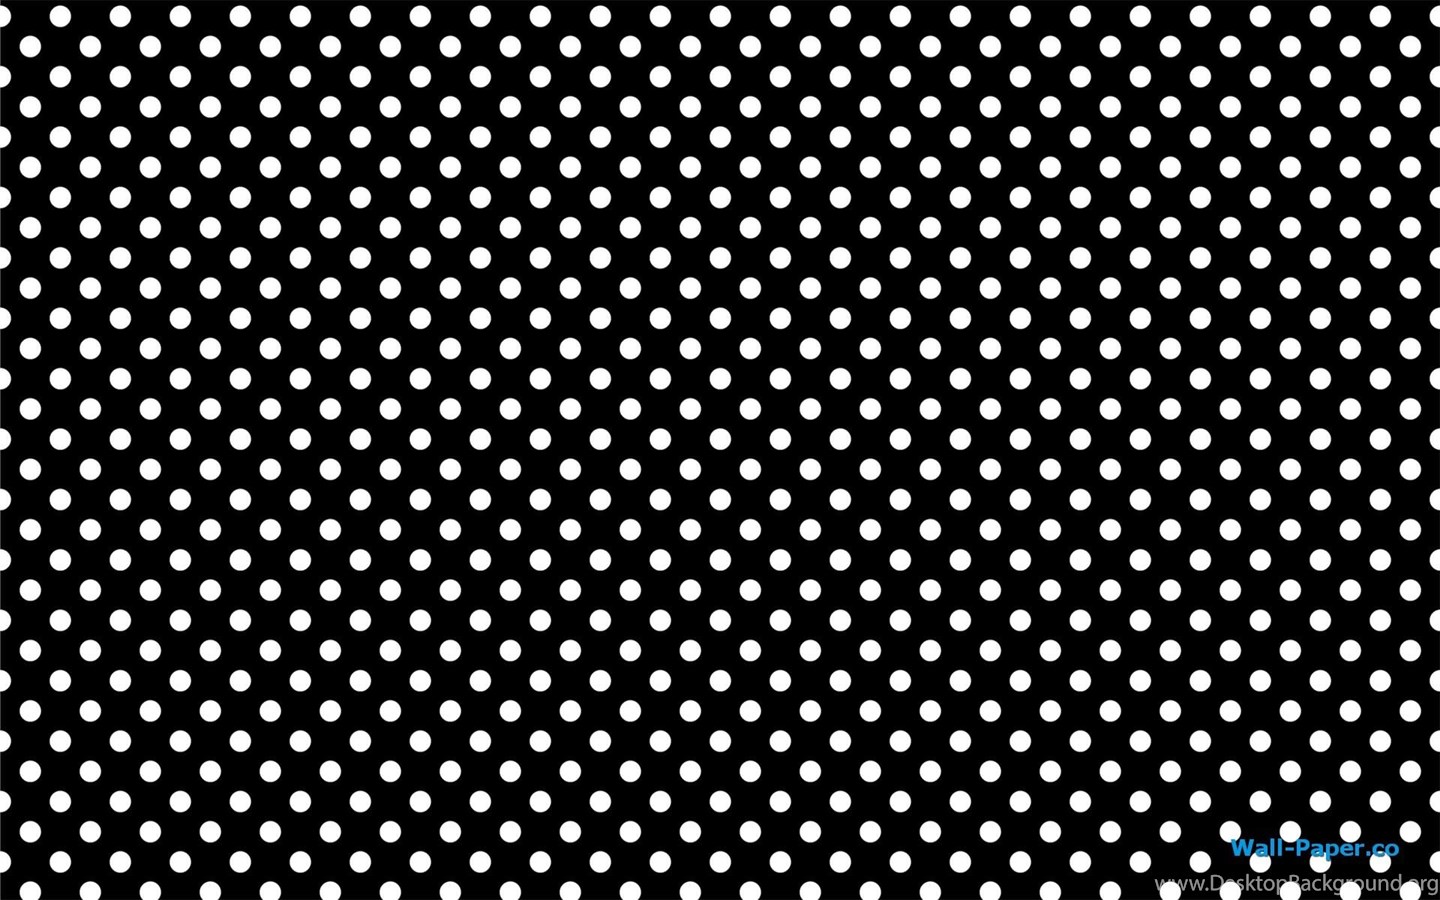 Black And White Polka Dot Wallpapers Wallpapers HD Fine ...